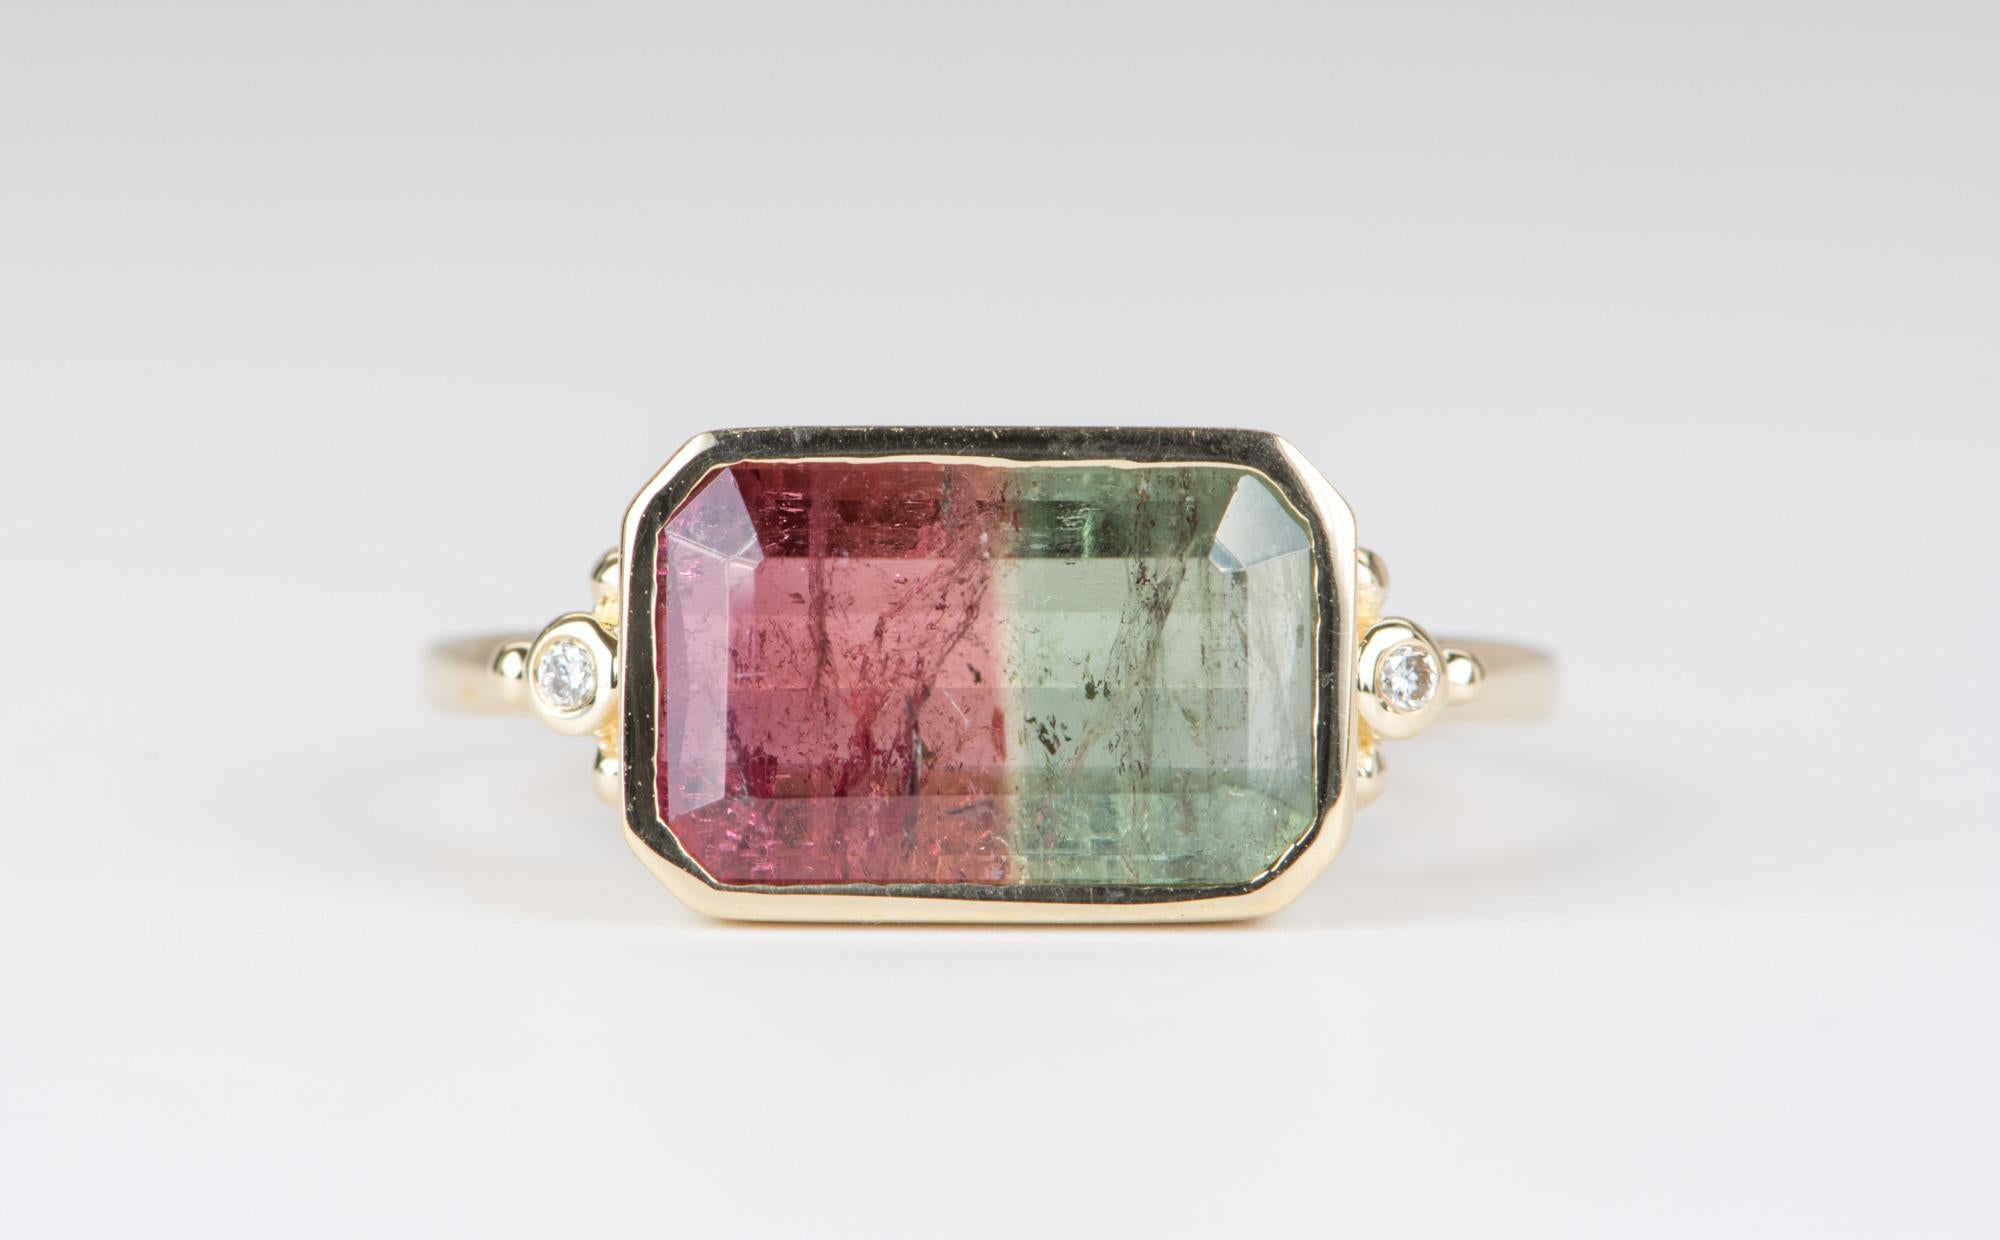 ♥  A solid 14K yellow gold ring set with a large bi-color watermelon tourmaline in the center, flanked by diamonds and gold beads on each side
♥  This is a stunning statement ring, the tourmaline has a vibrant mix of pink and green colors
♥  The